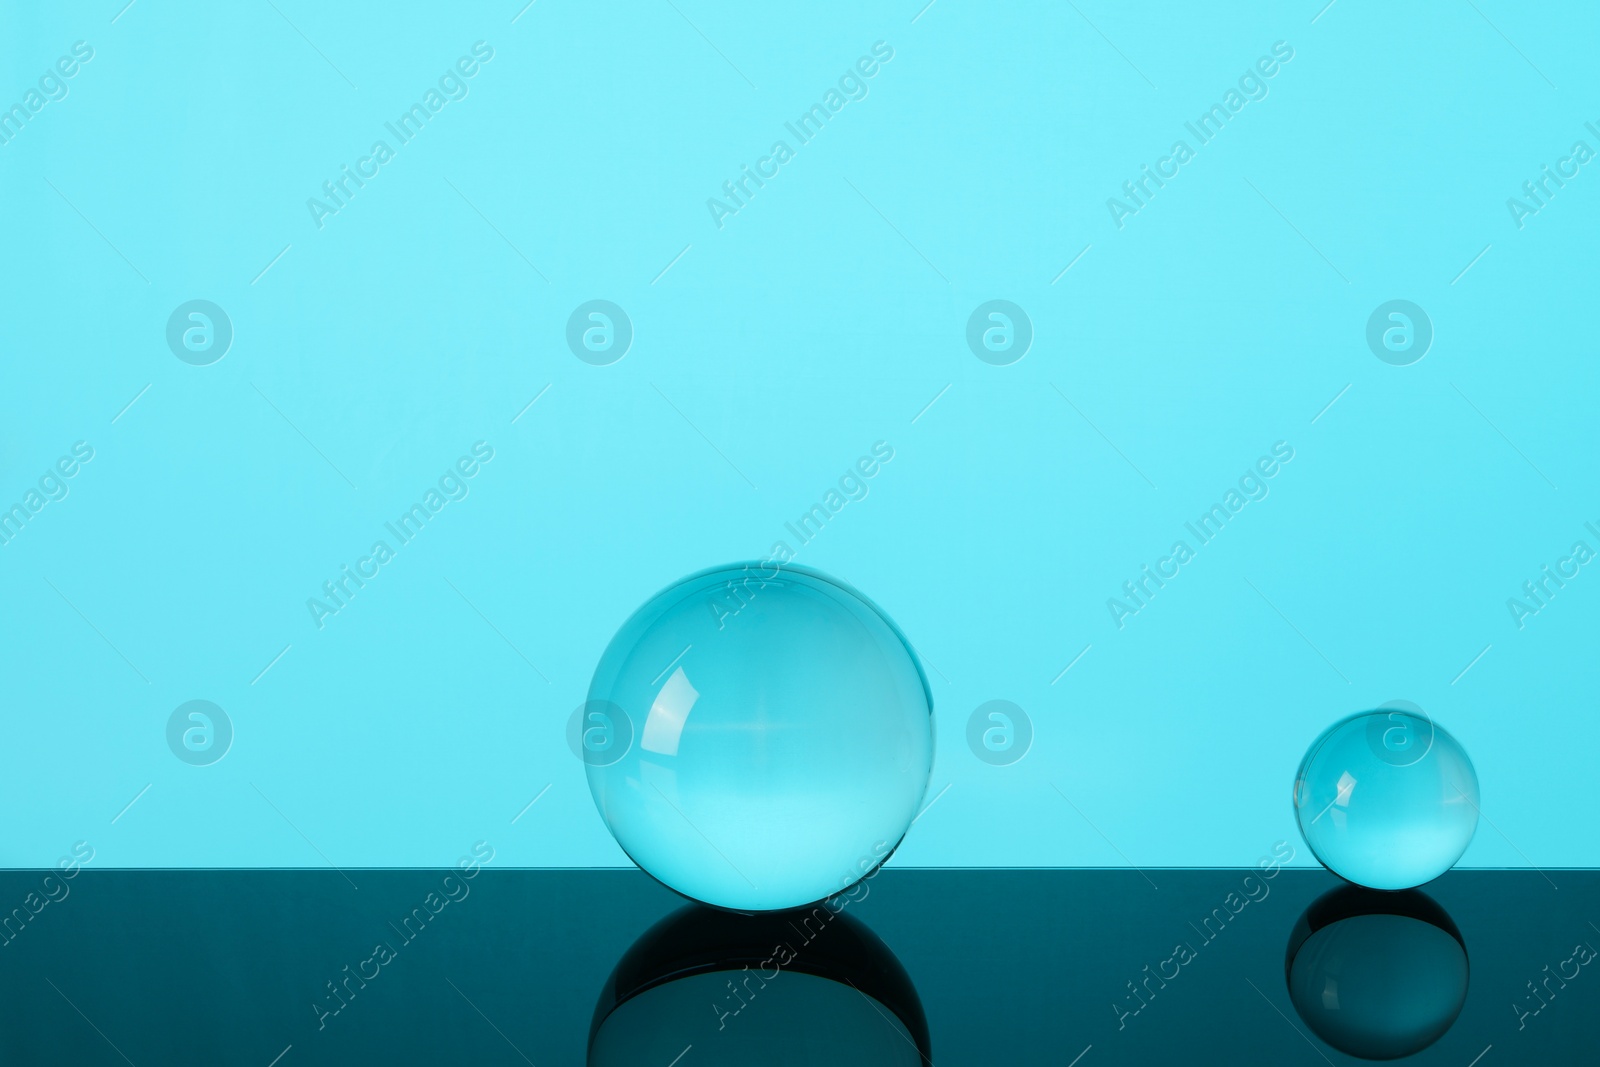 Photo of Transparent glass balls on mirror surface against turquoise background. Space for text